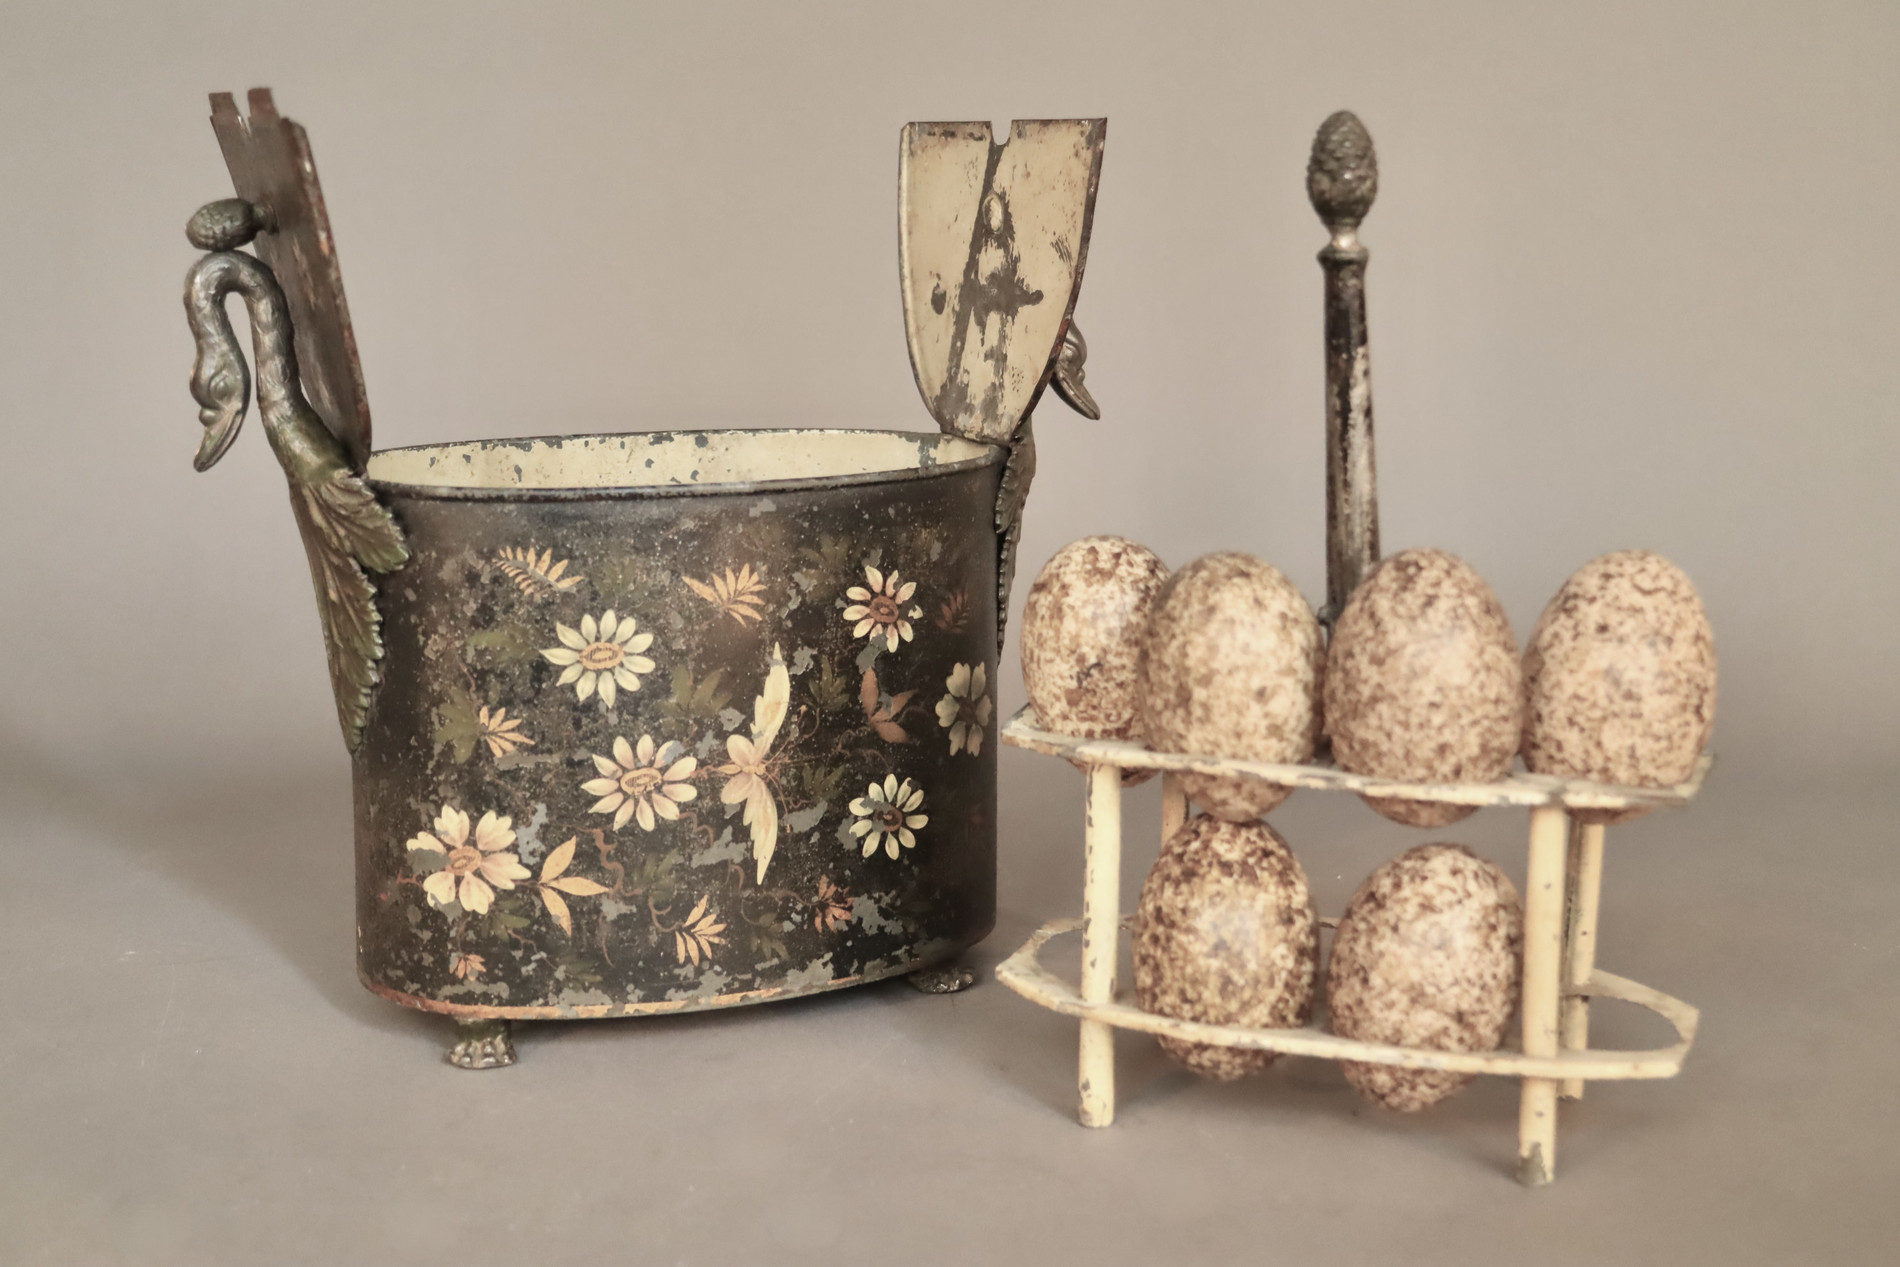 19th century cold painted iron egg basket